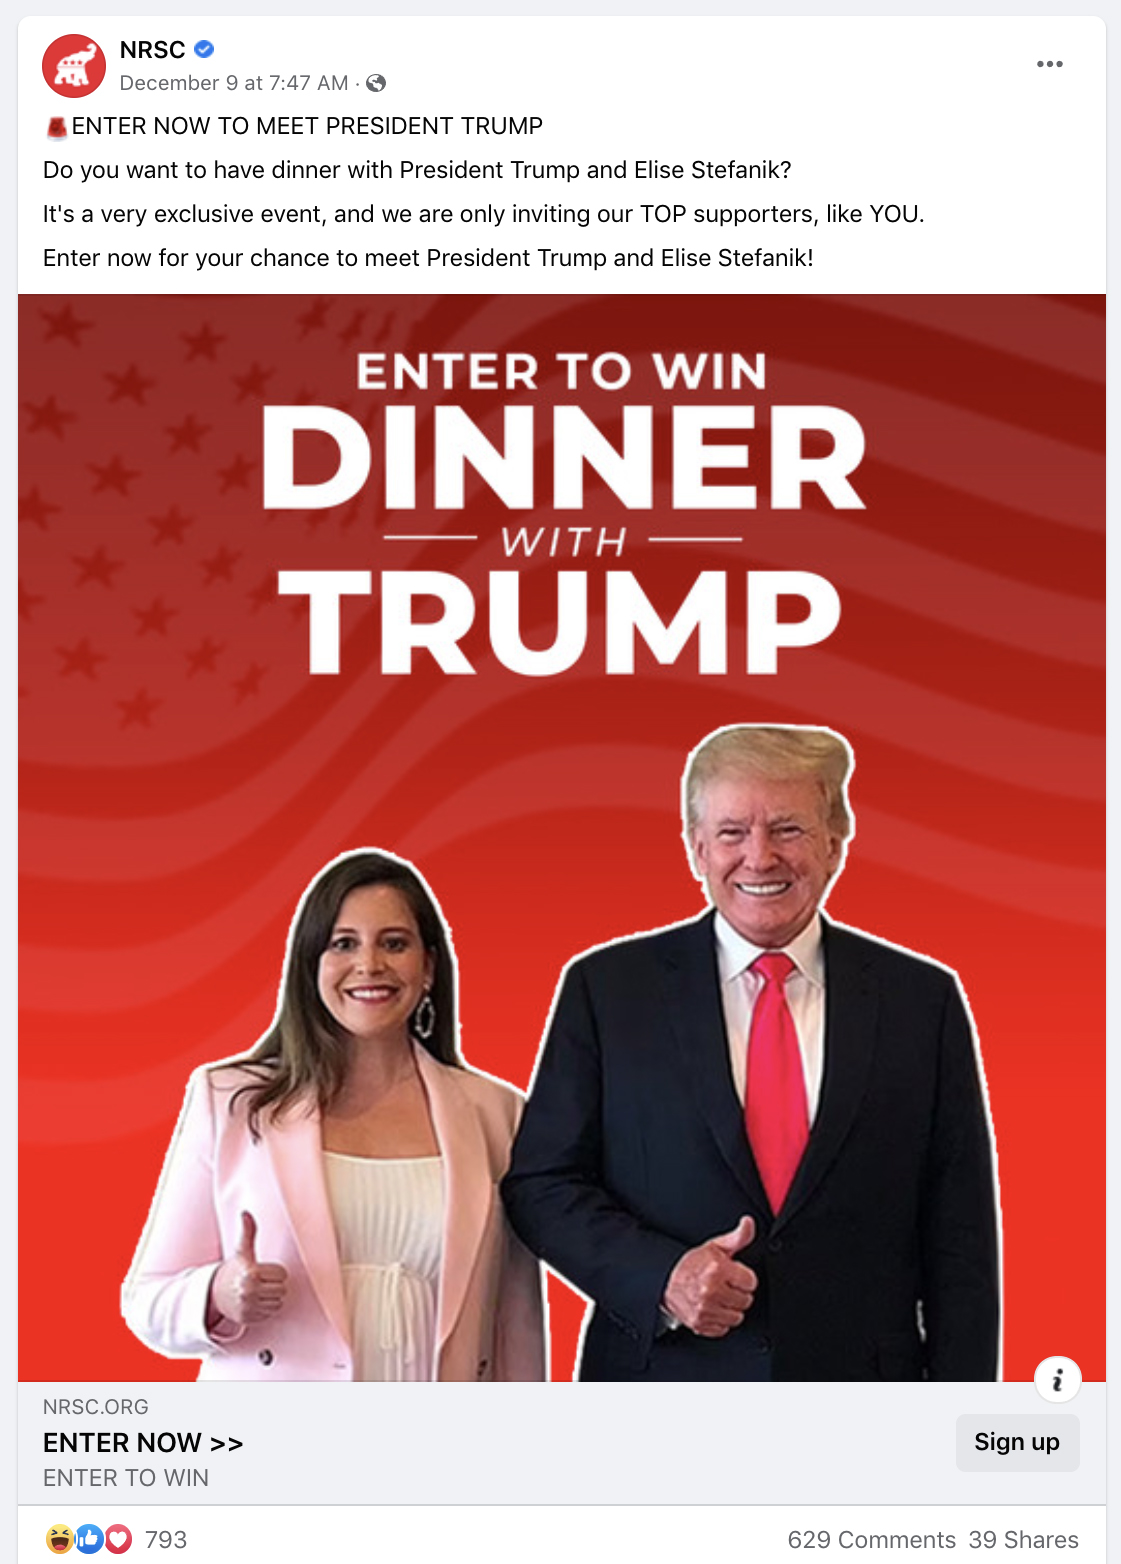 Facebook and Instagram ads from NRSC promised a dinner with Trump and Stefanik.